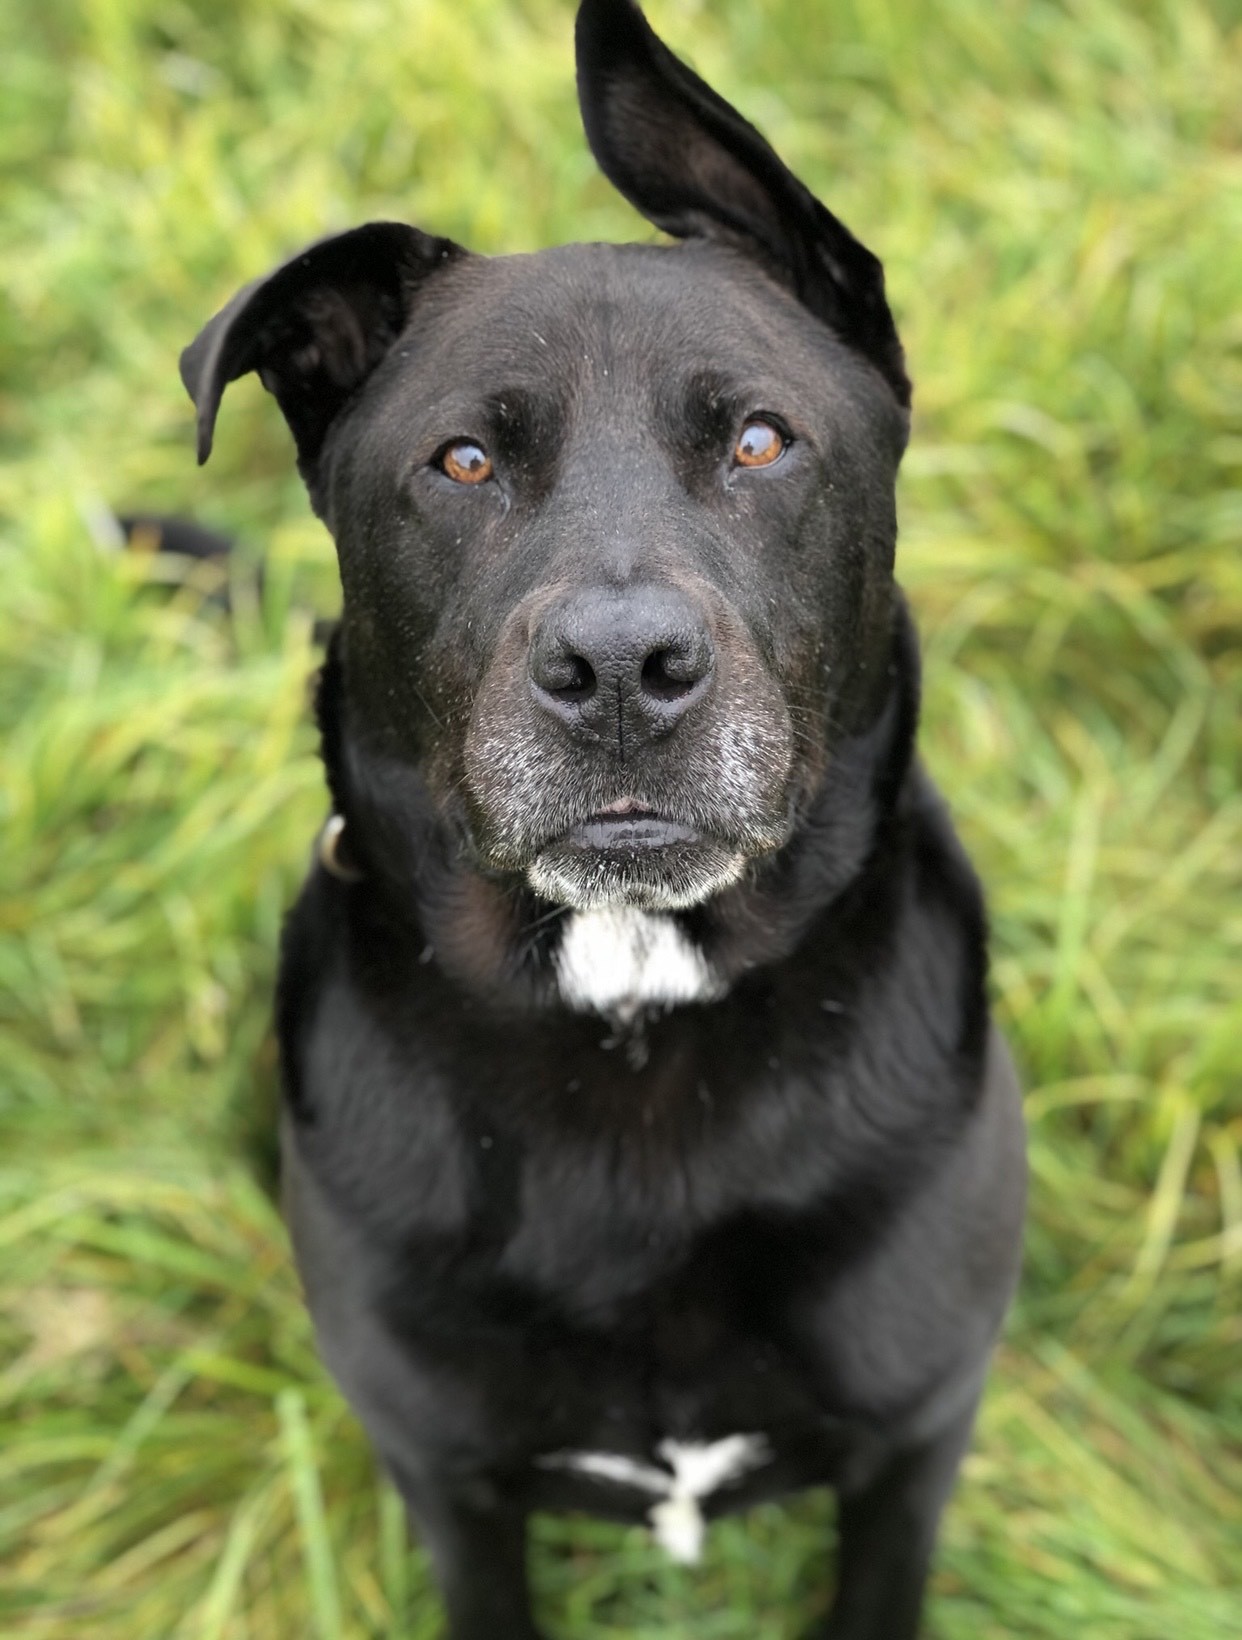 Maxy has been in the rescue centre since December 2019 